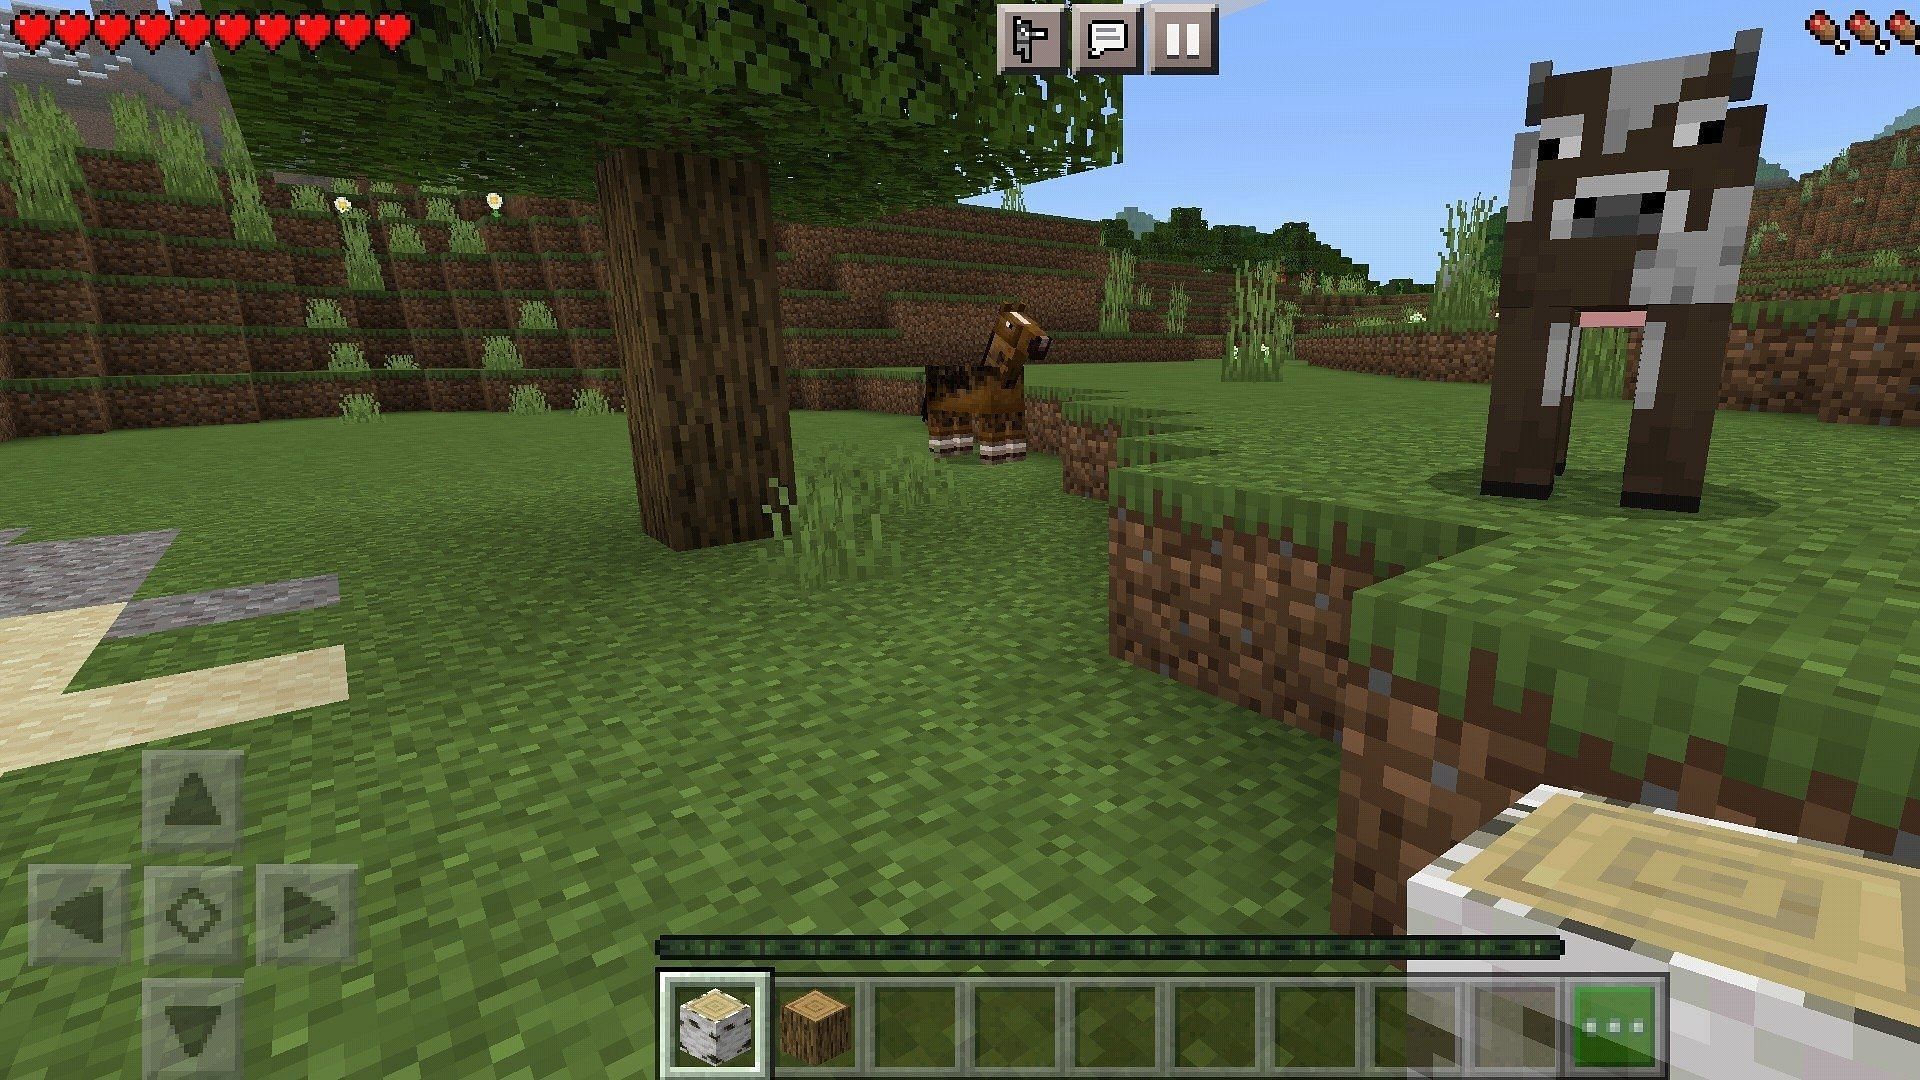 Minecraft on Android can be installed via an APK file (Image via Mojang)